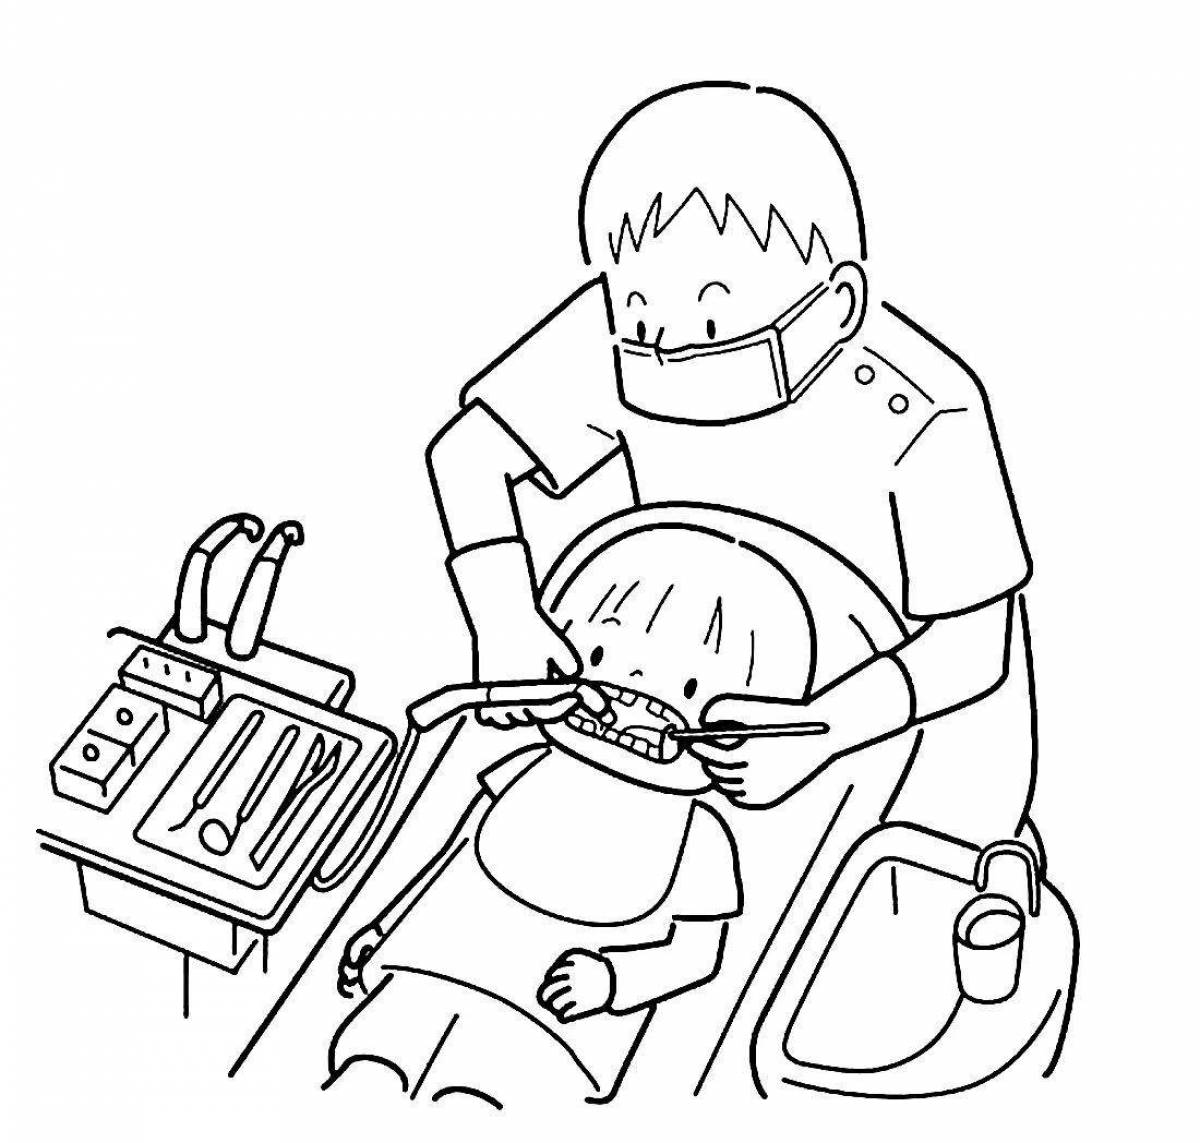 Coloring page excellent dentist